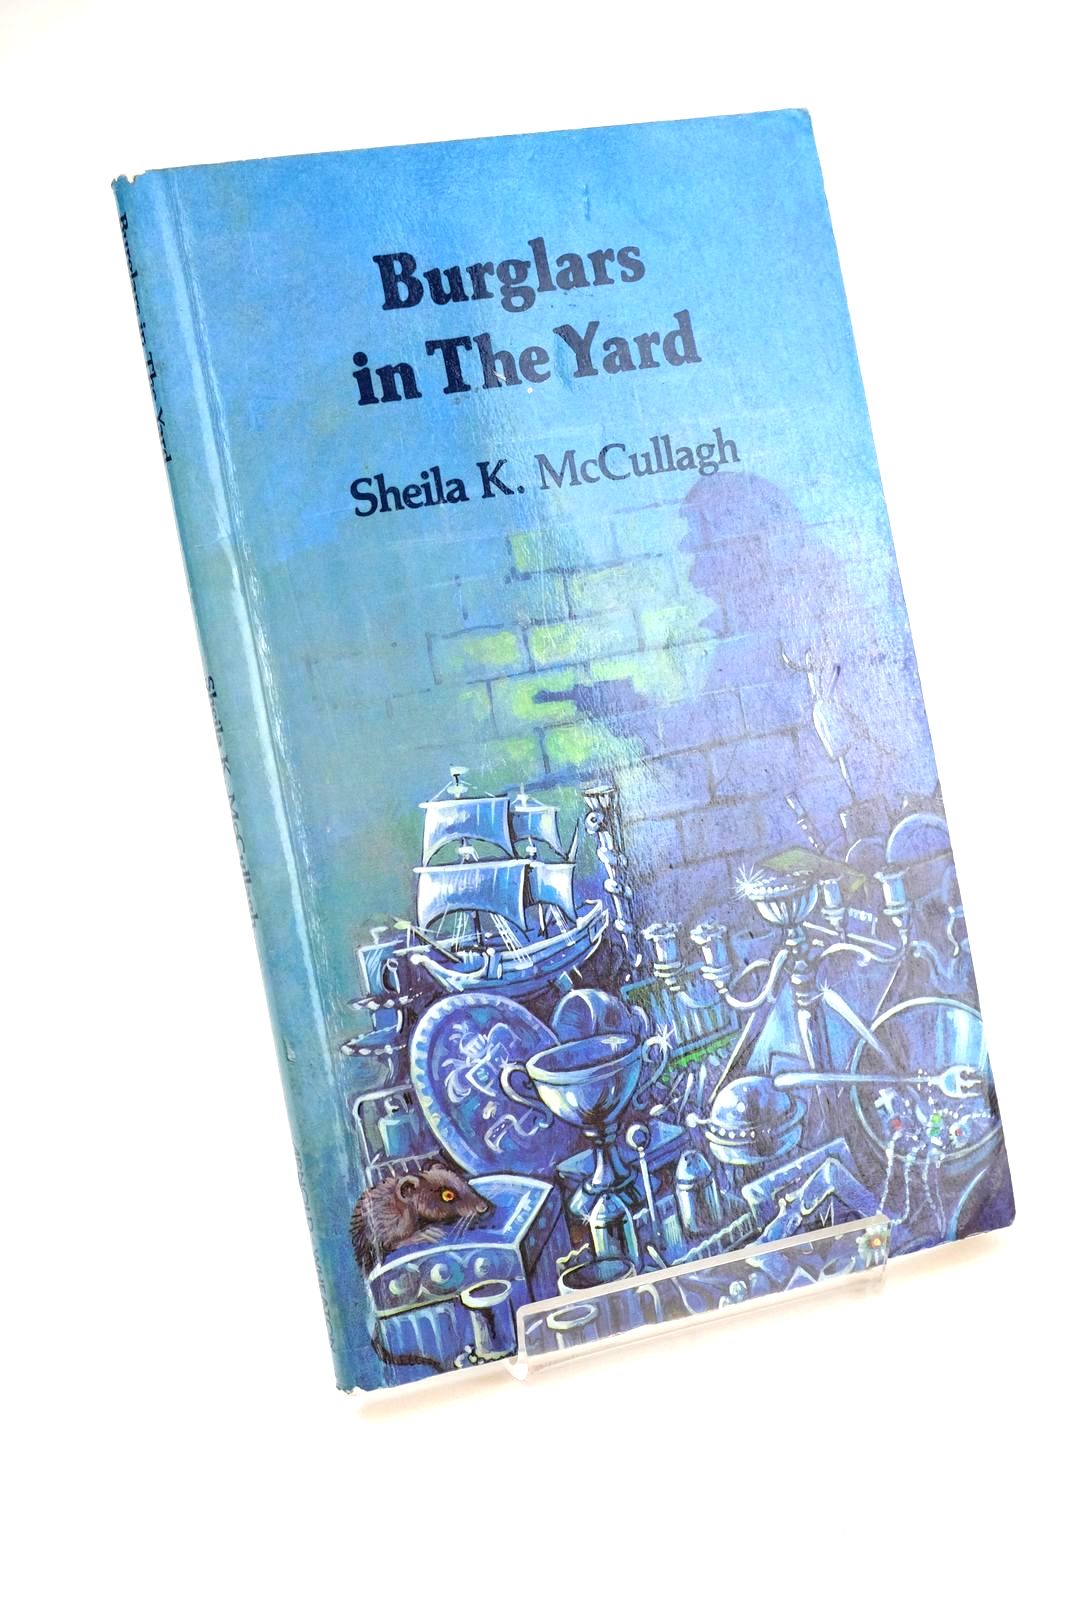 Photo of BURGLARS IN THE YARD written by McCullagh, Sheila K. illustrated by Mutimer, Ray published by McCullagh Publishing (STOCK CODE: 1324151)  for sale by Stella & Rose's Books